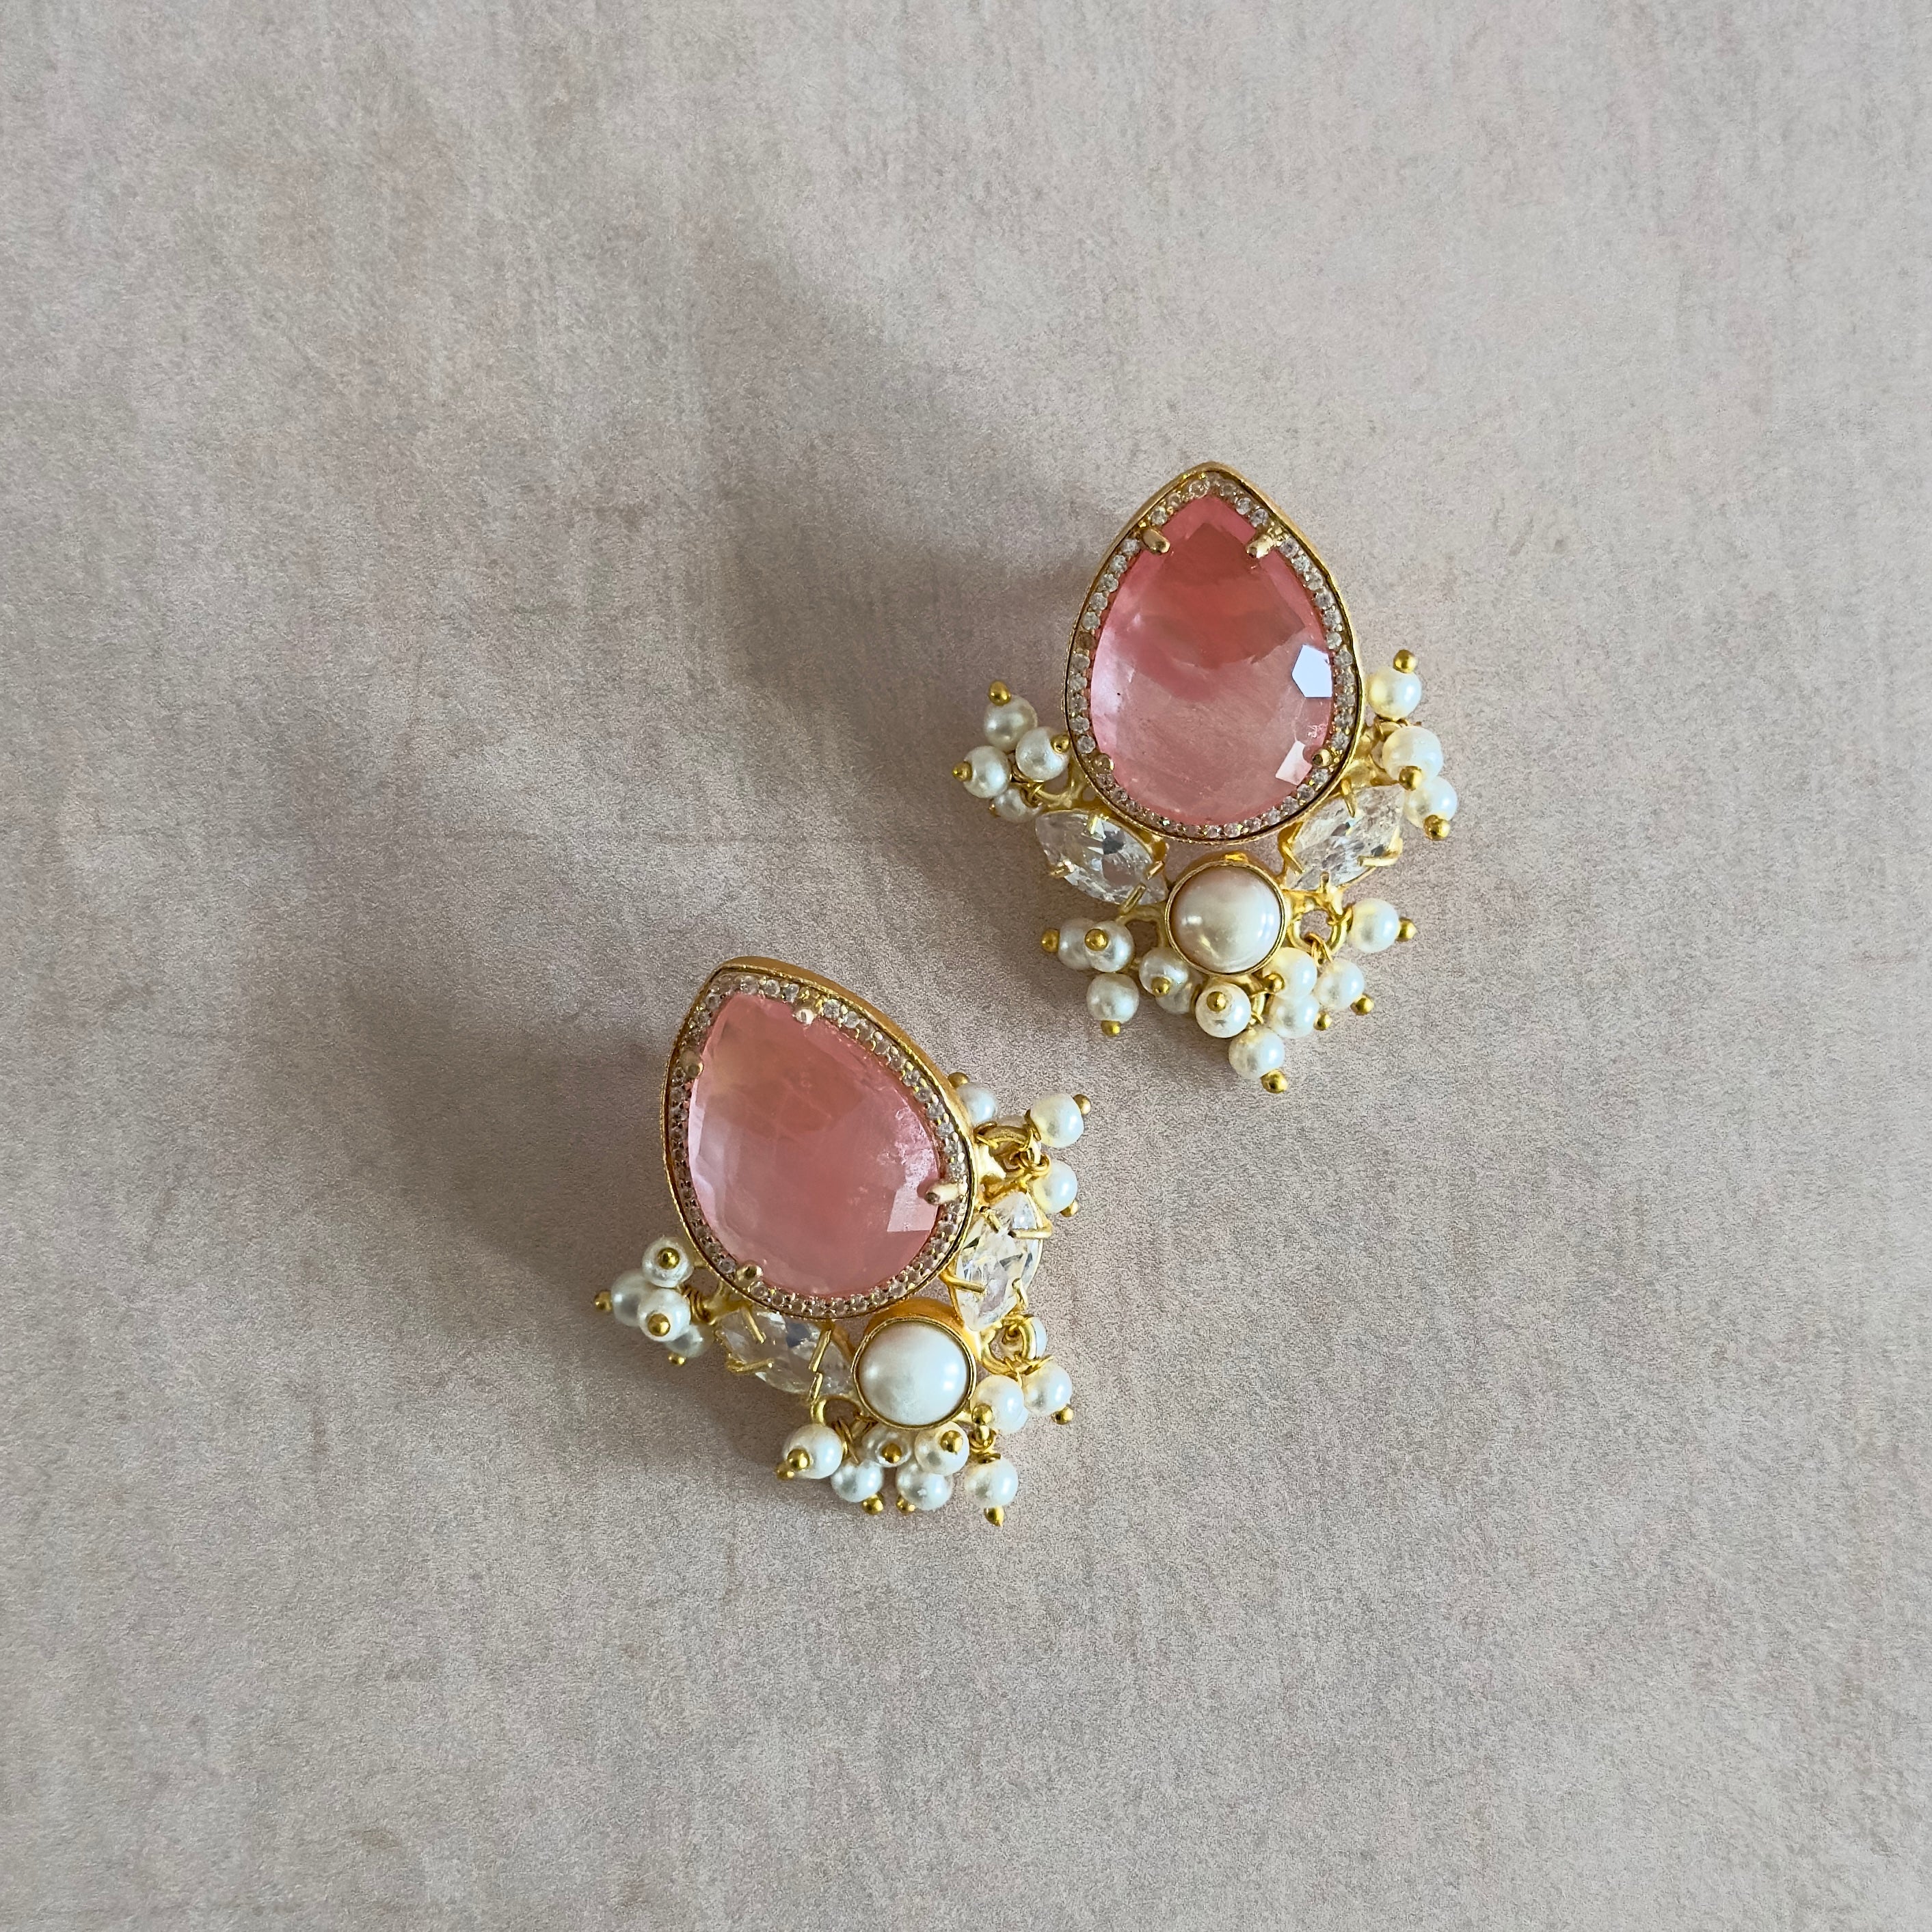 Add a touch of elegance with our new Bria Earrings featuring a crimson quartz center stone, pearl accents, and sparkling cz crystals. Elevate any outfit with a pop of color and shine. A must-have for the fashion-forward.